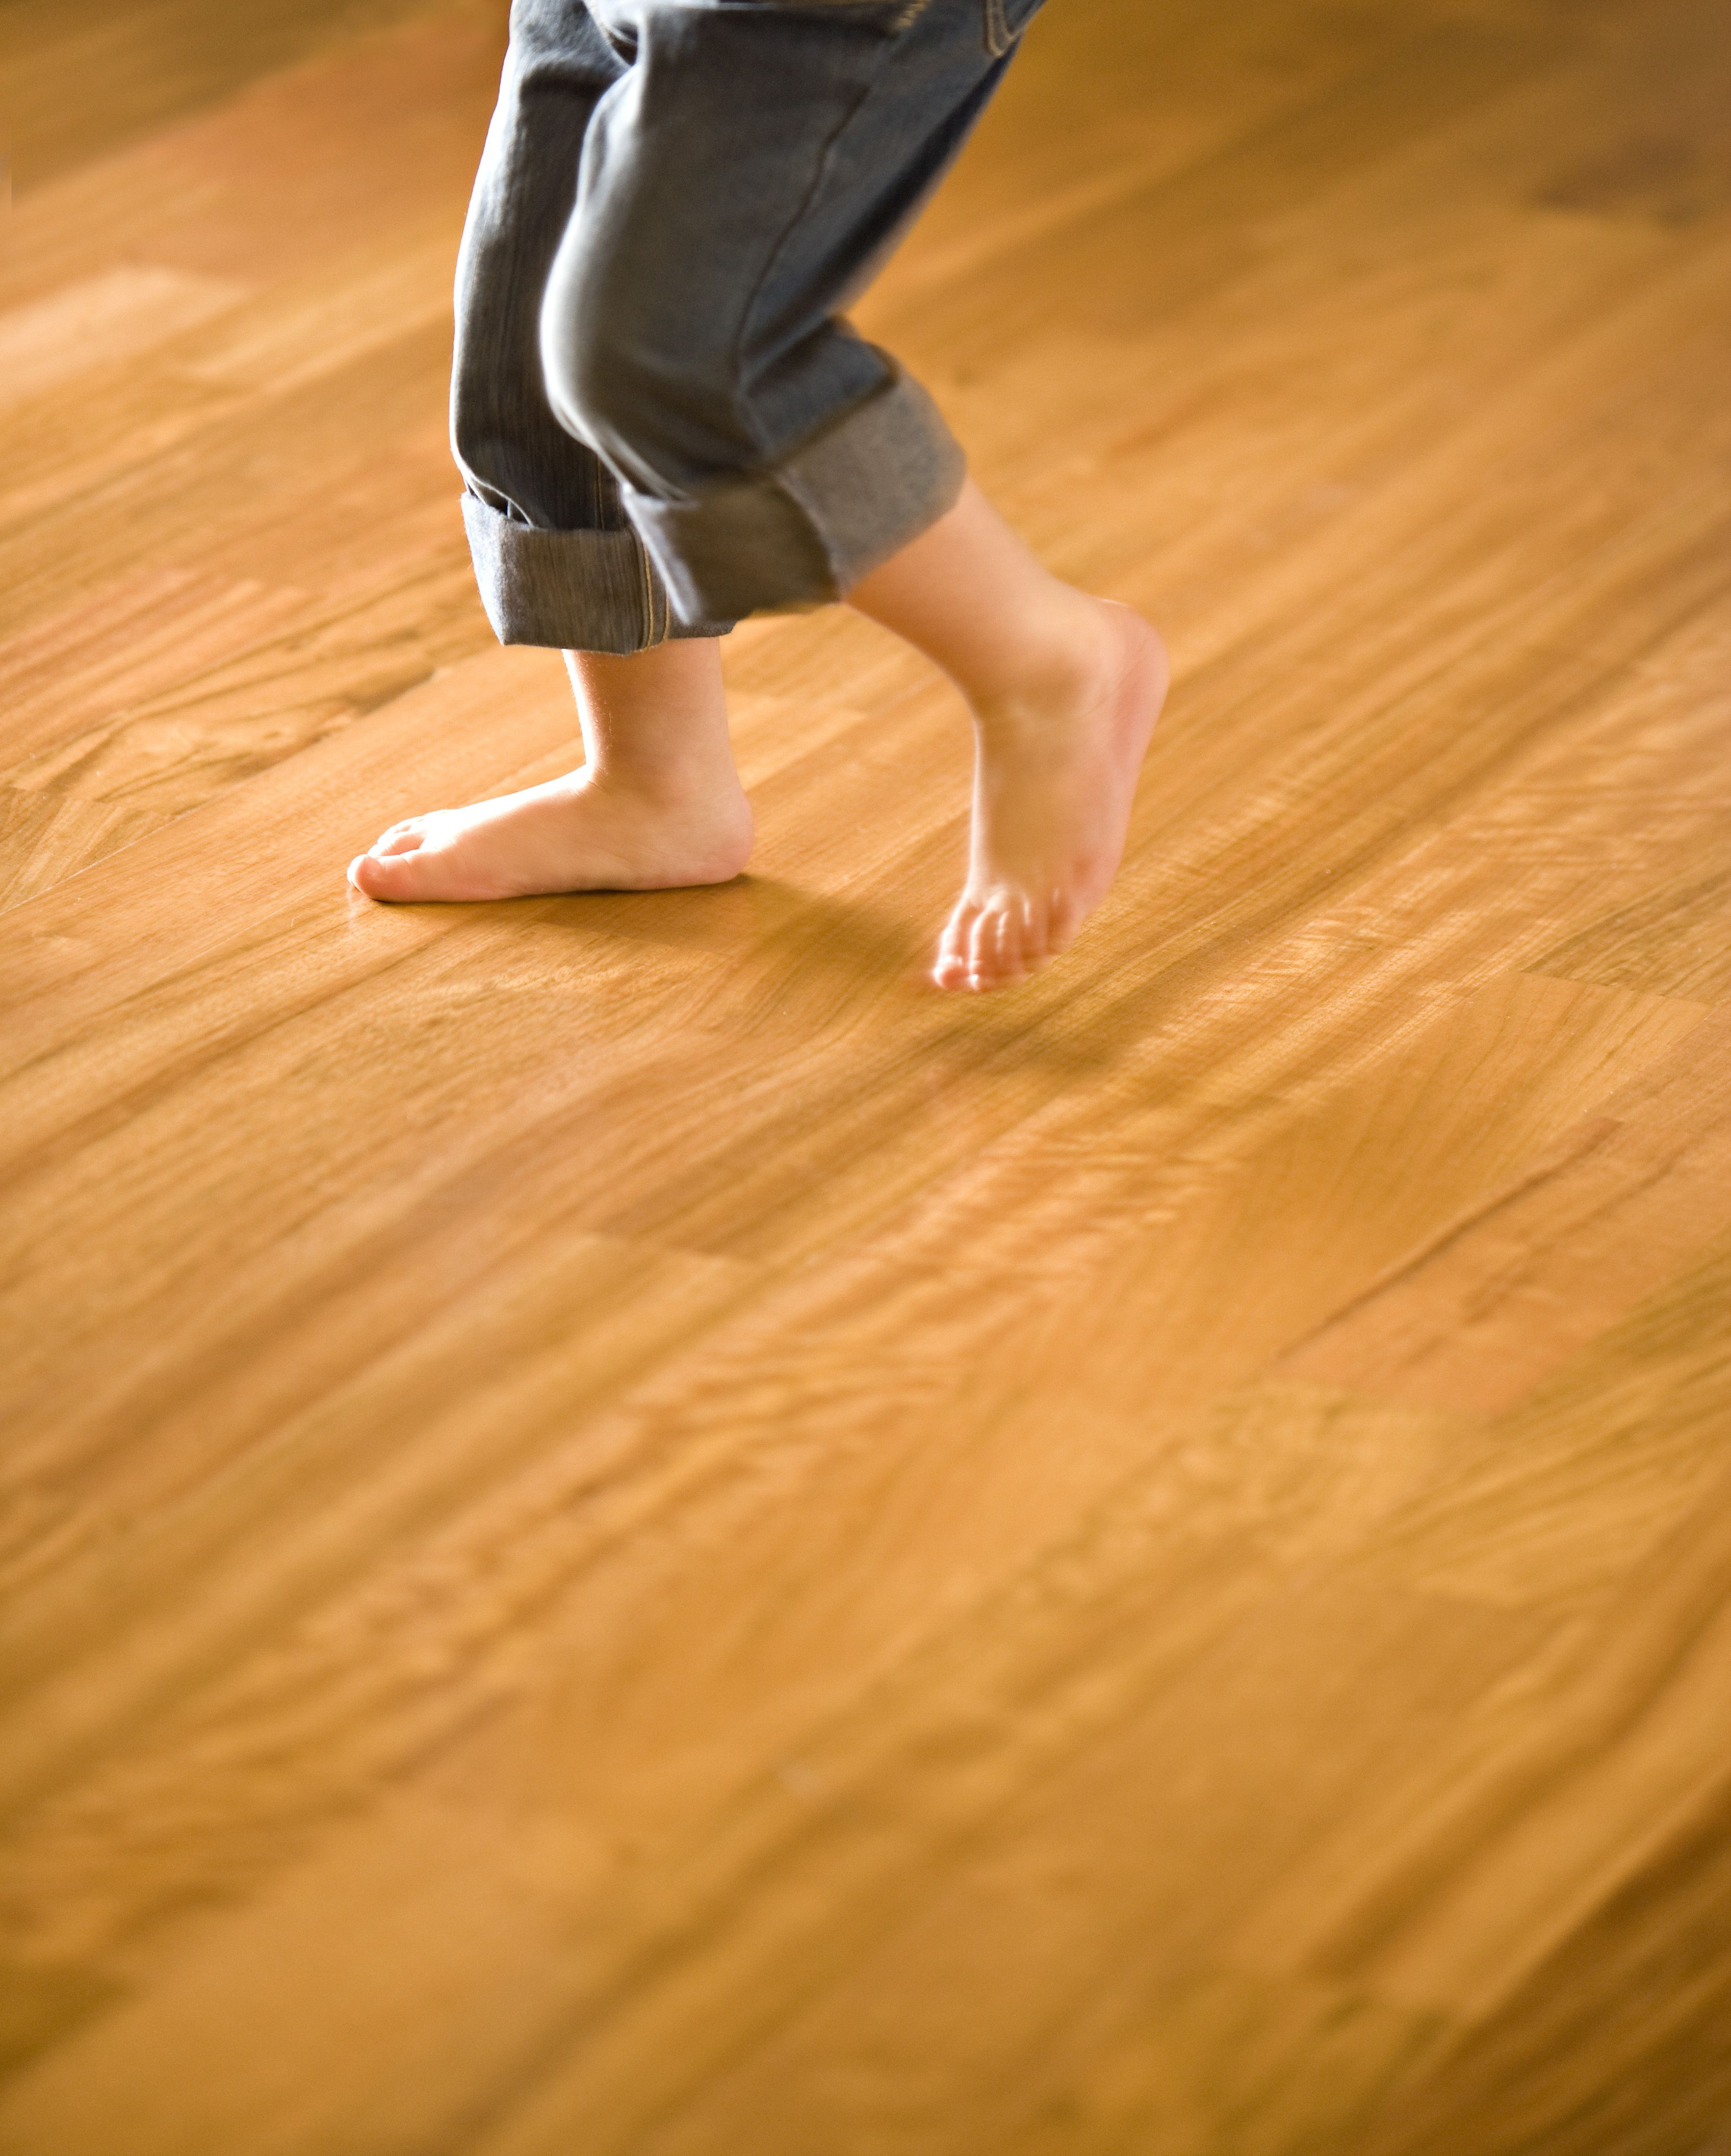 24 Ideal Hardwood Floor Care Products 2024 free download hardwood floor care products of make sure your hardwood floors are clean for the tiny bare feet in in make sure your hardwood floors are clean for the tiny bare feet in your home